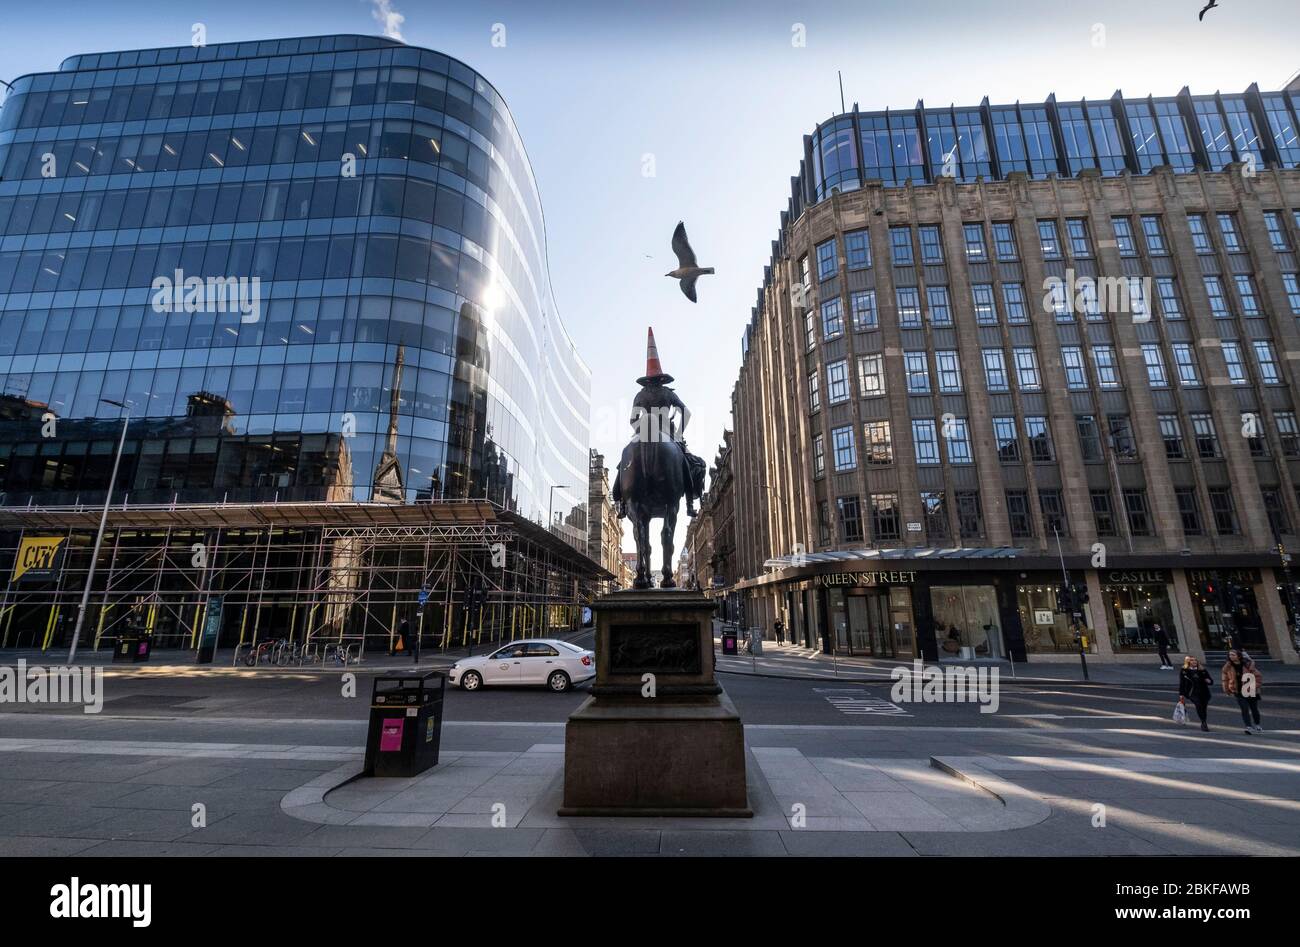 The Duke of Wellington Statue outside of the Gallery of Modern art in Glasgow during the Covid-19 lockdown. Stock Photo